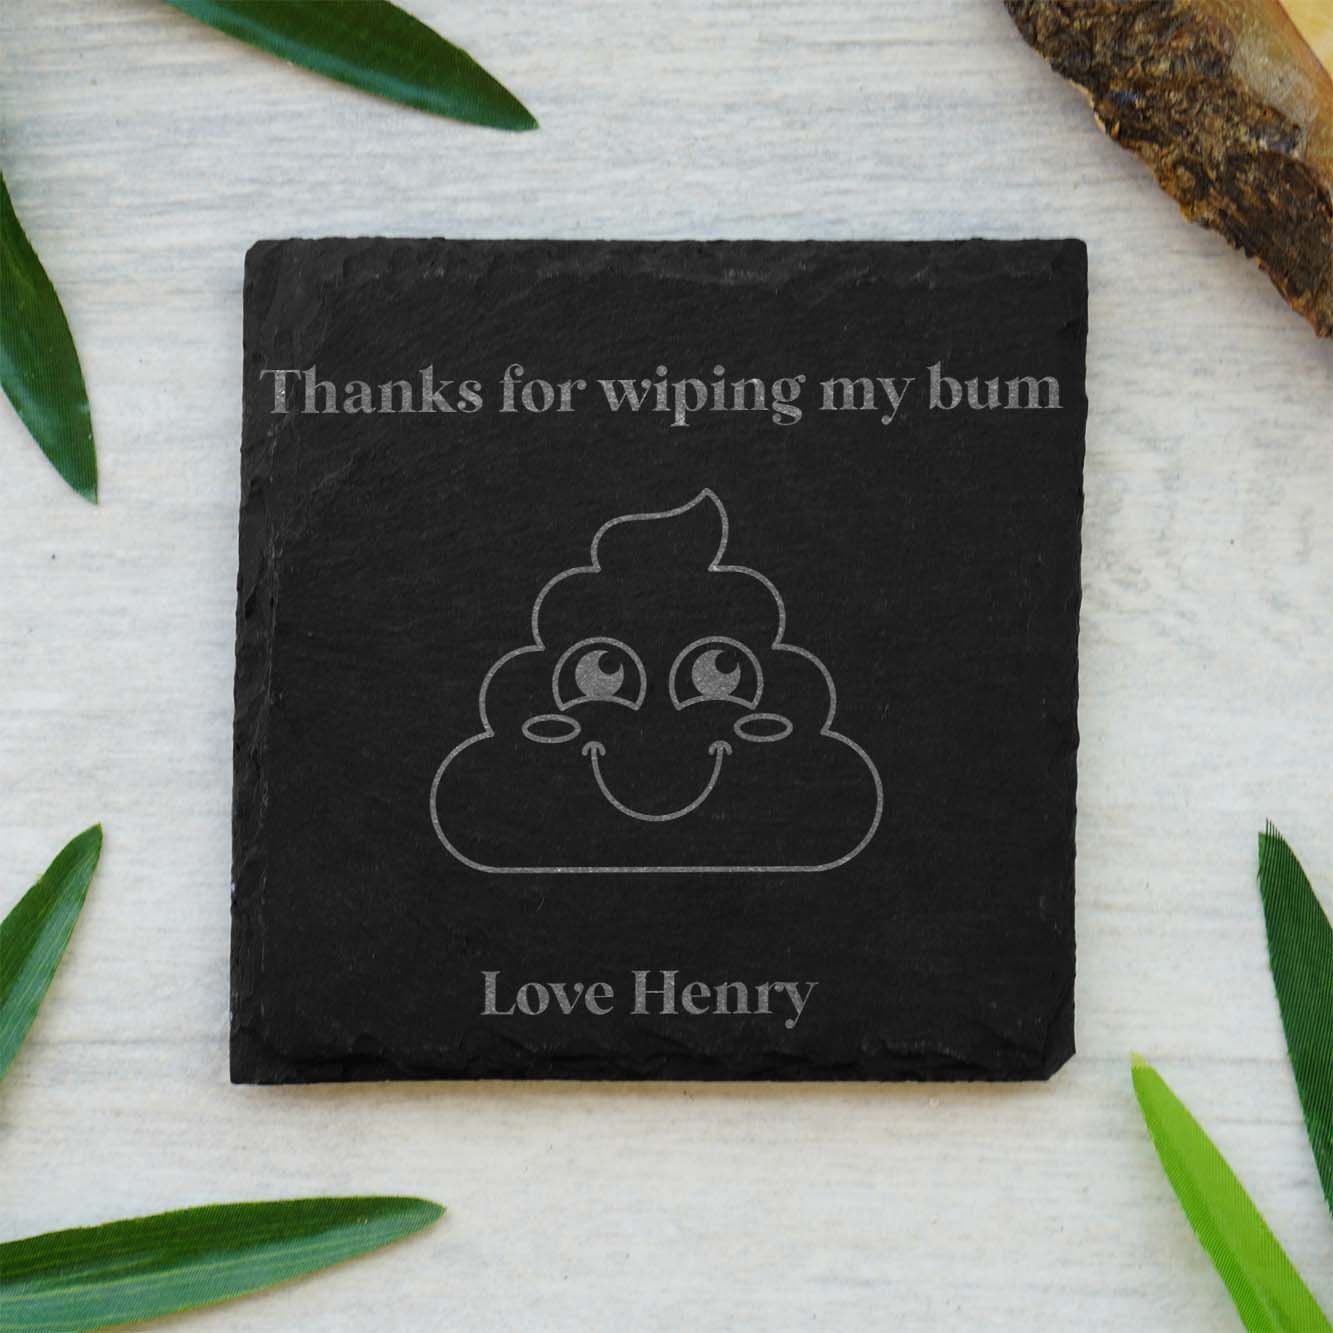 Funny Personalised Slate Coaster For Mum (Thanks for wiping my bum)